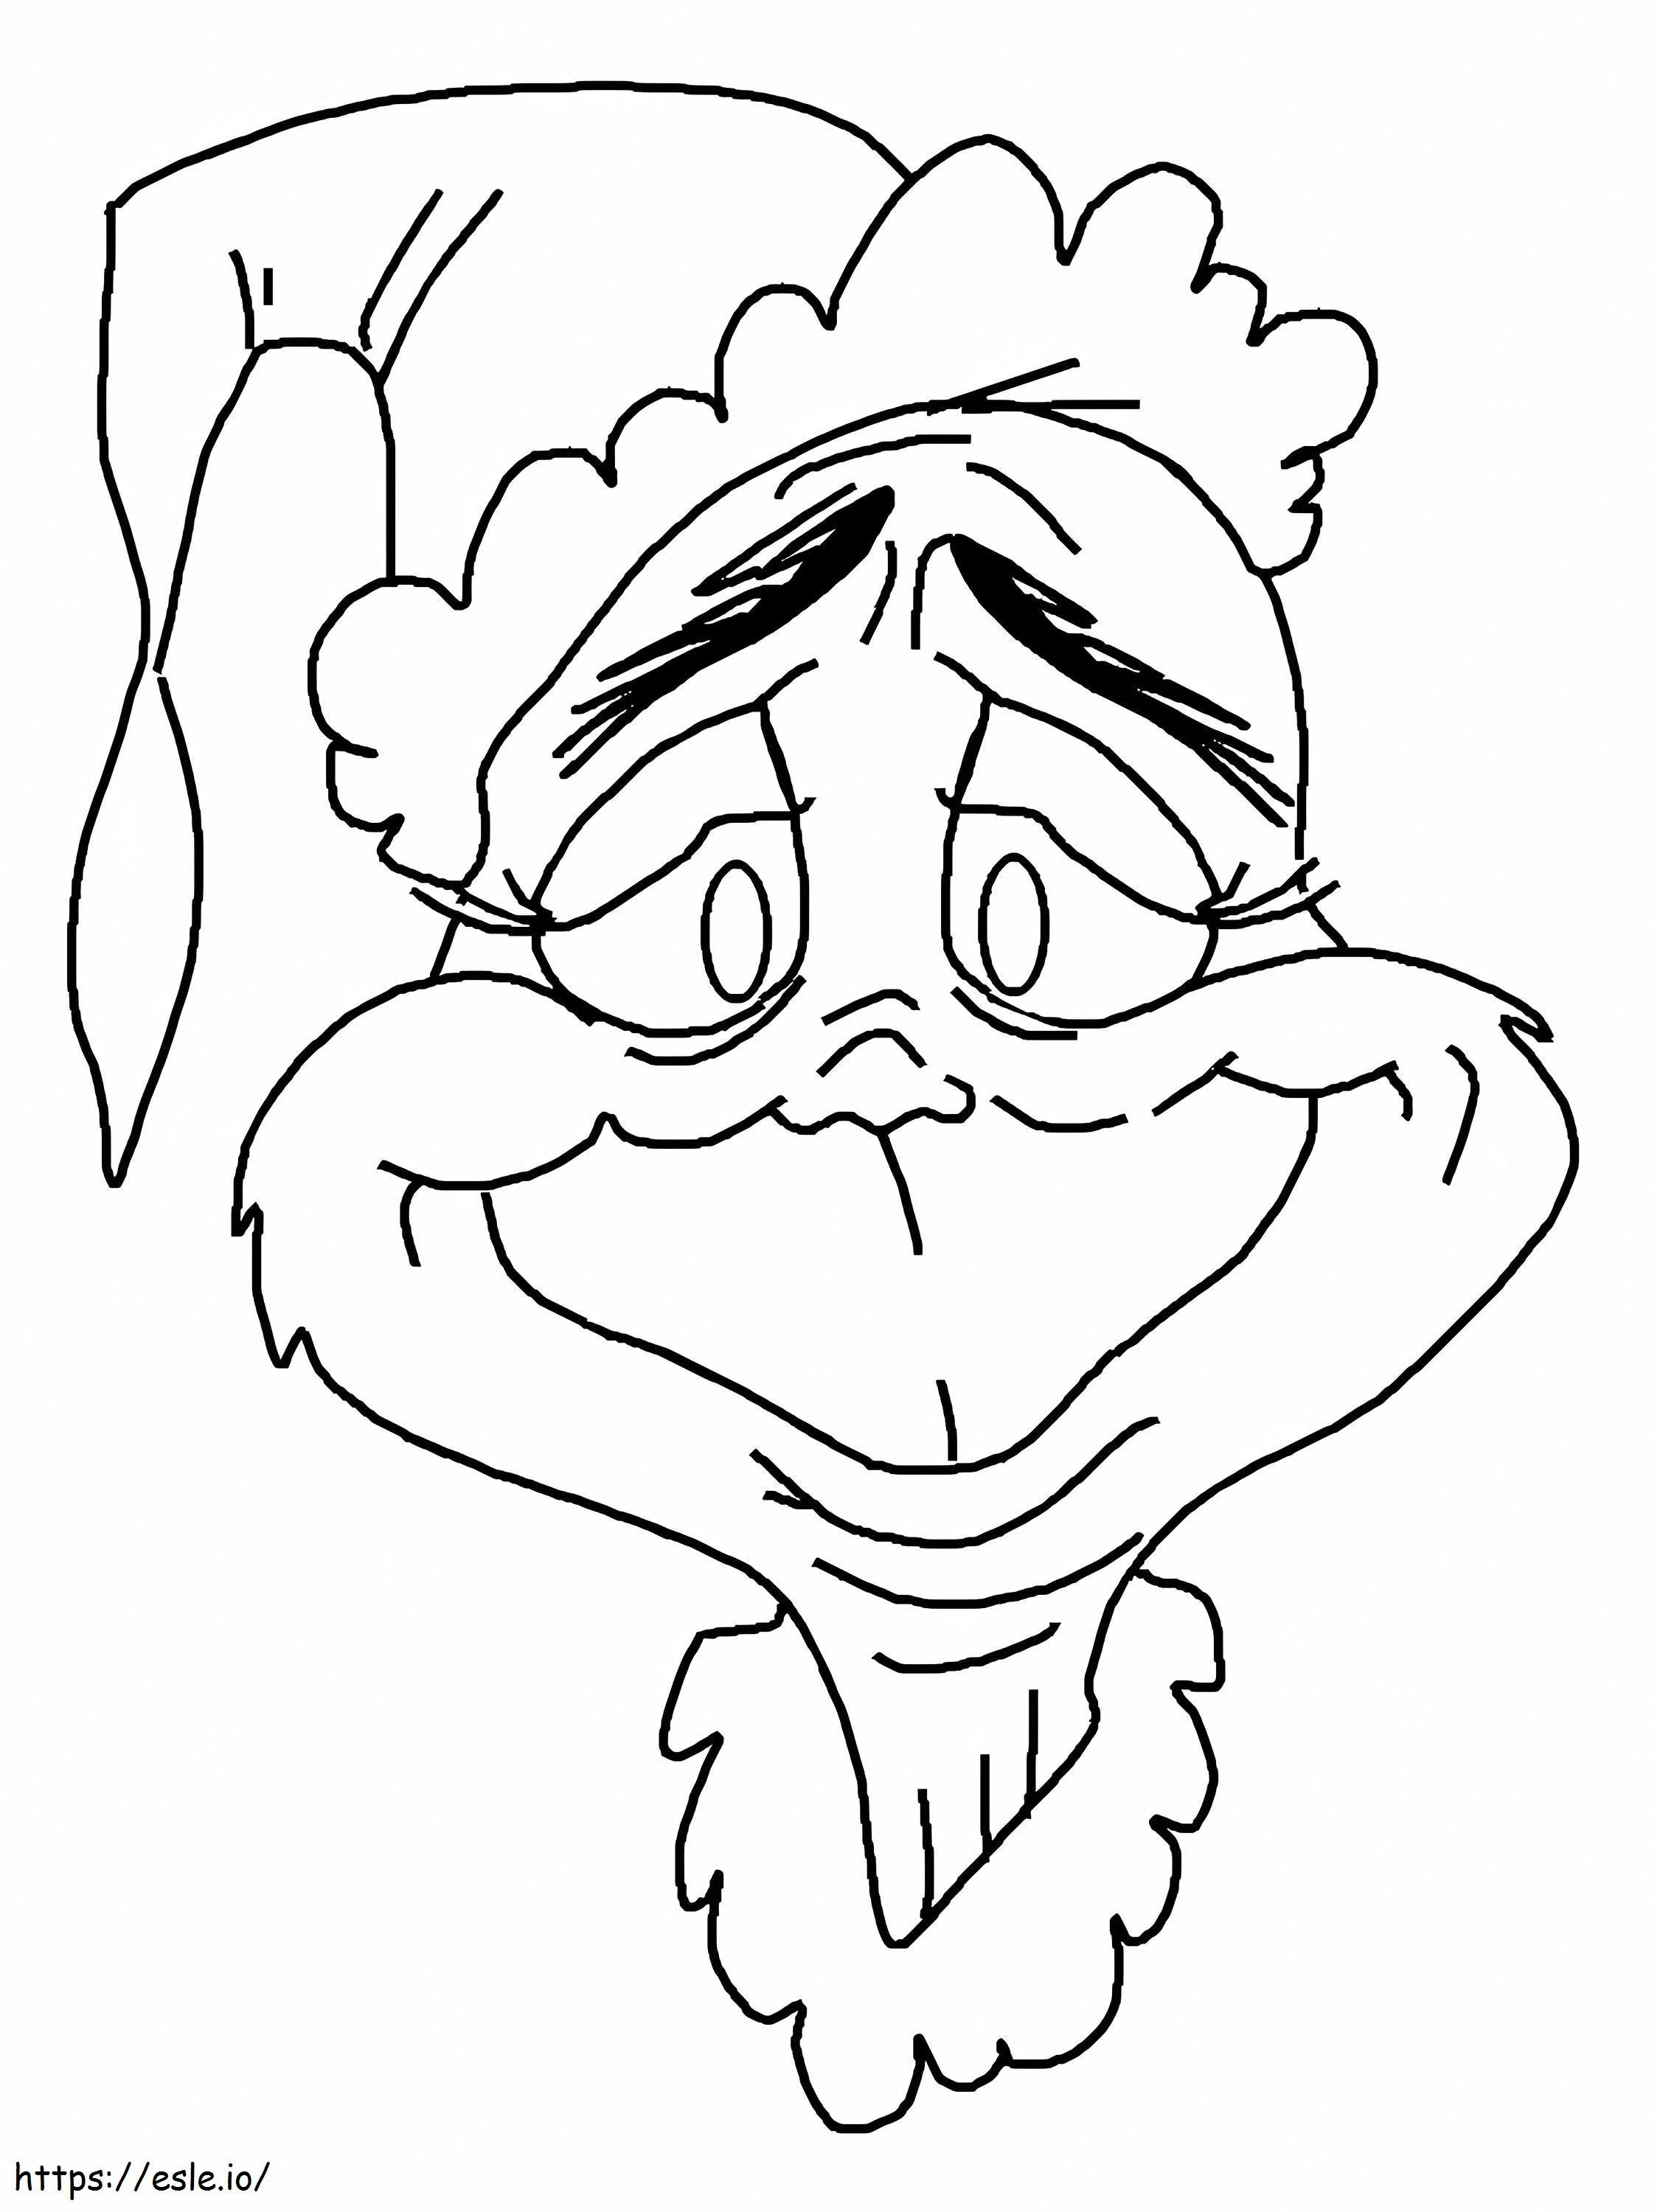 1571887190 Grinch coloring page